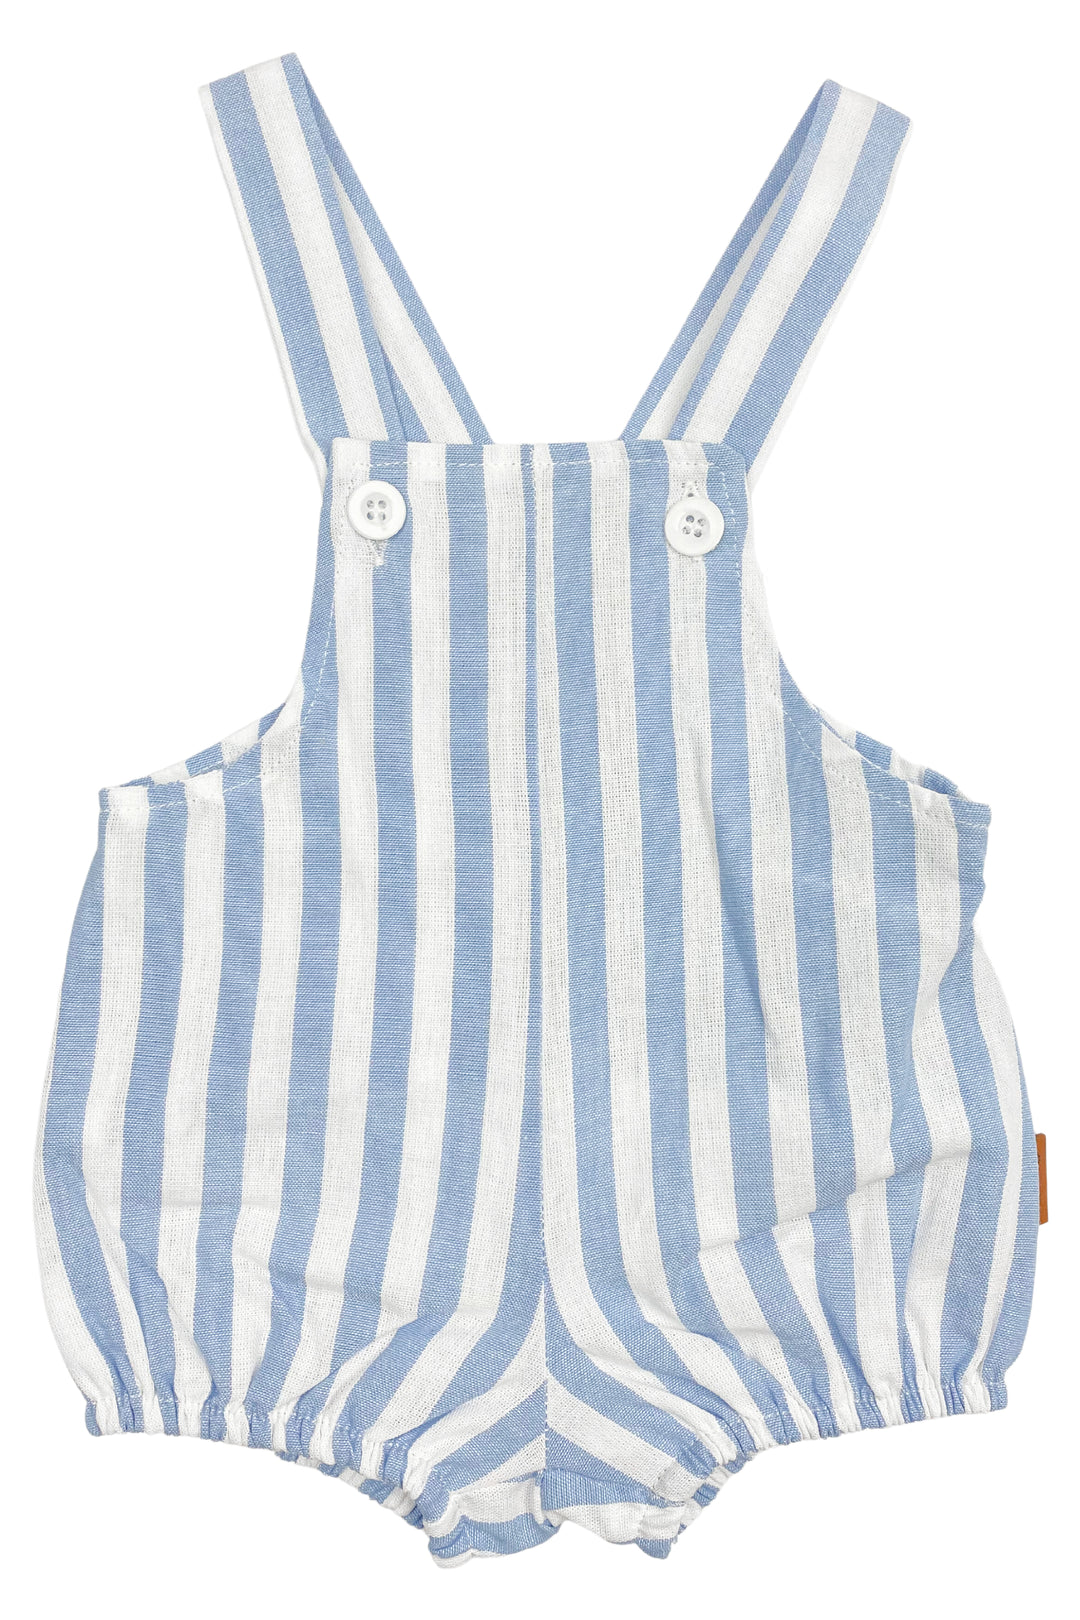 Cocote "Julian" Striped Dungaree Romper | Millie and John